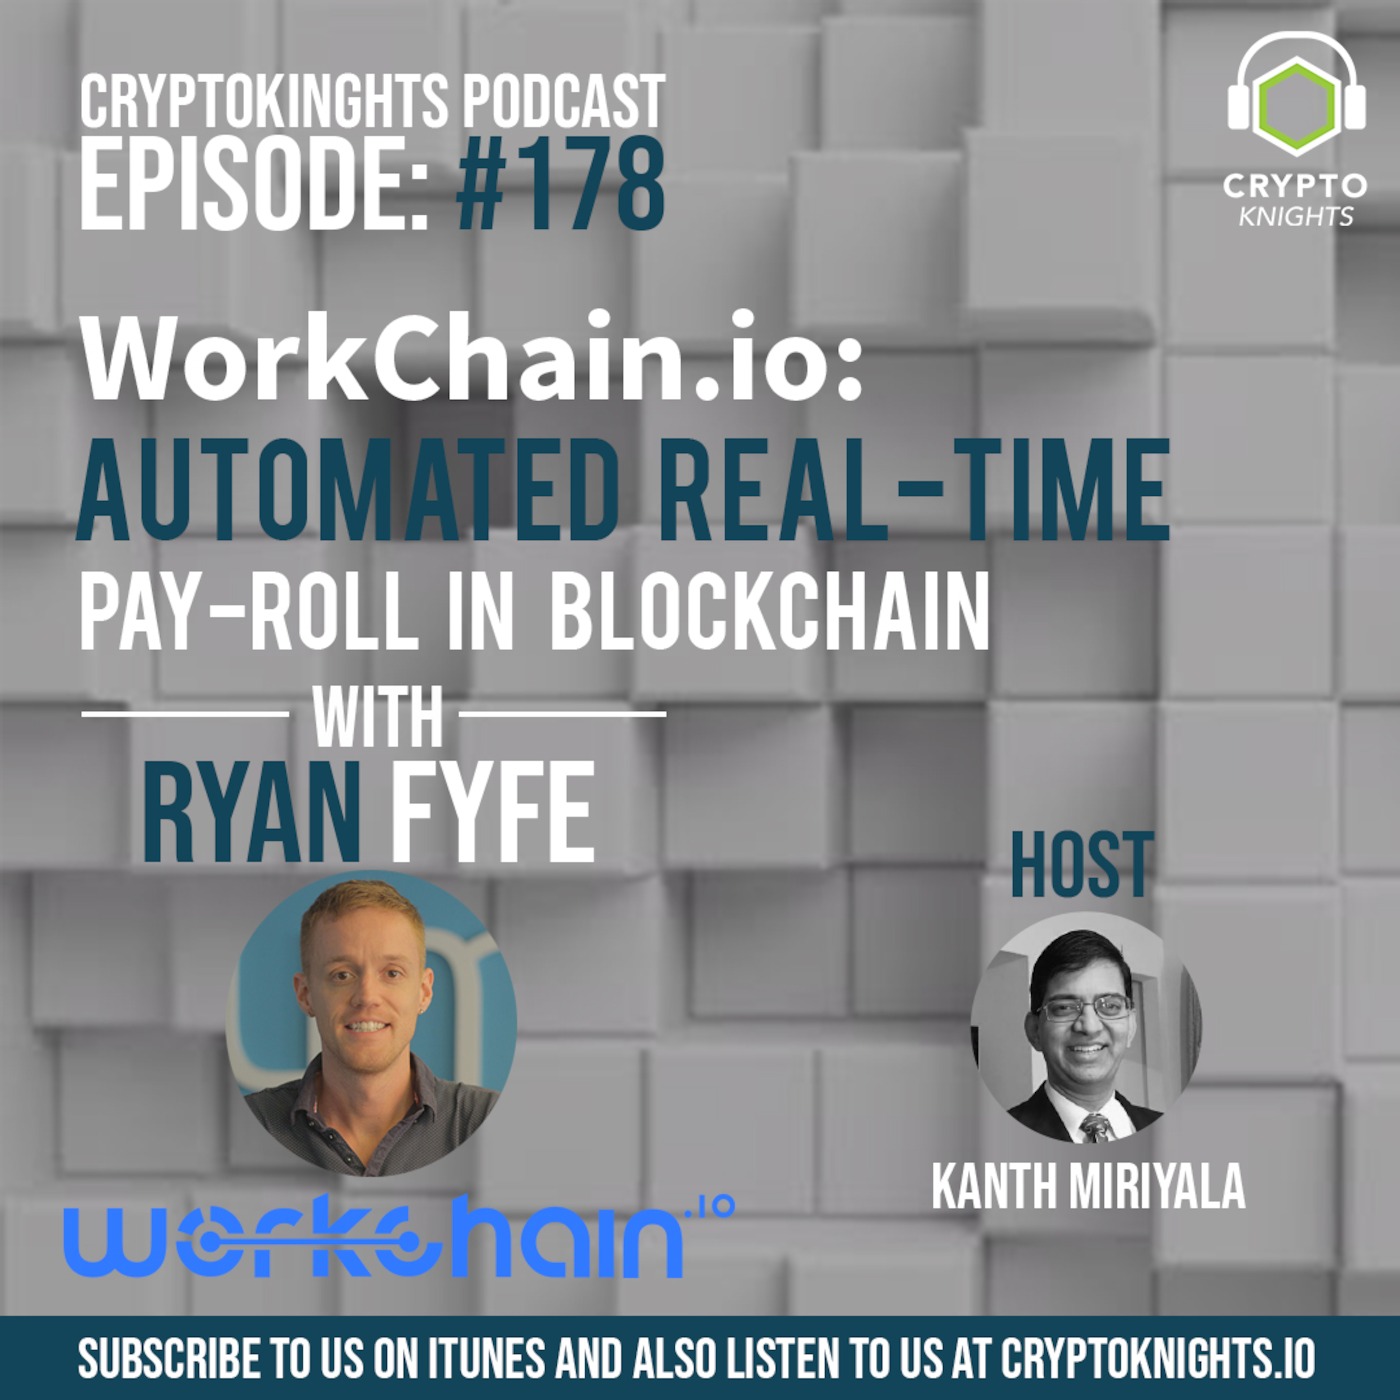 Episode 178- WorkChain.io: Automated Real-time Pay-Roll in Blockchain with Ryan Fyfe